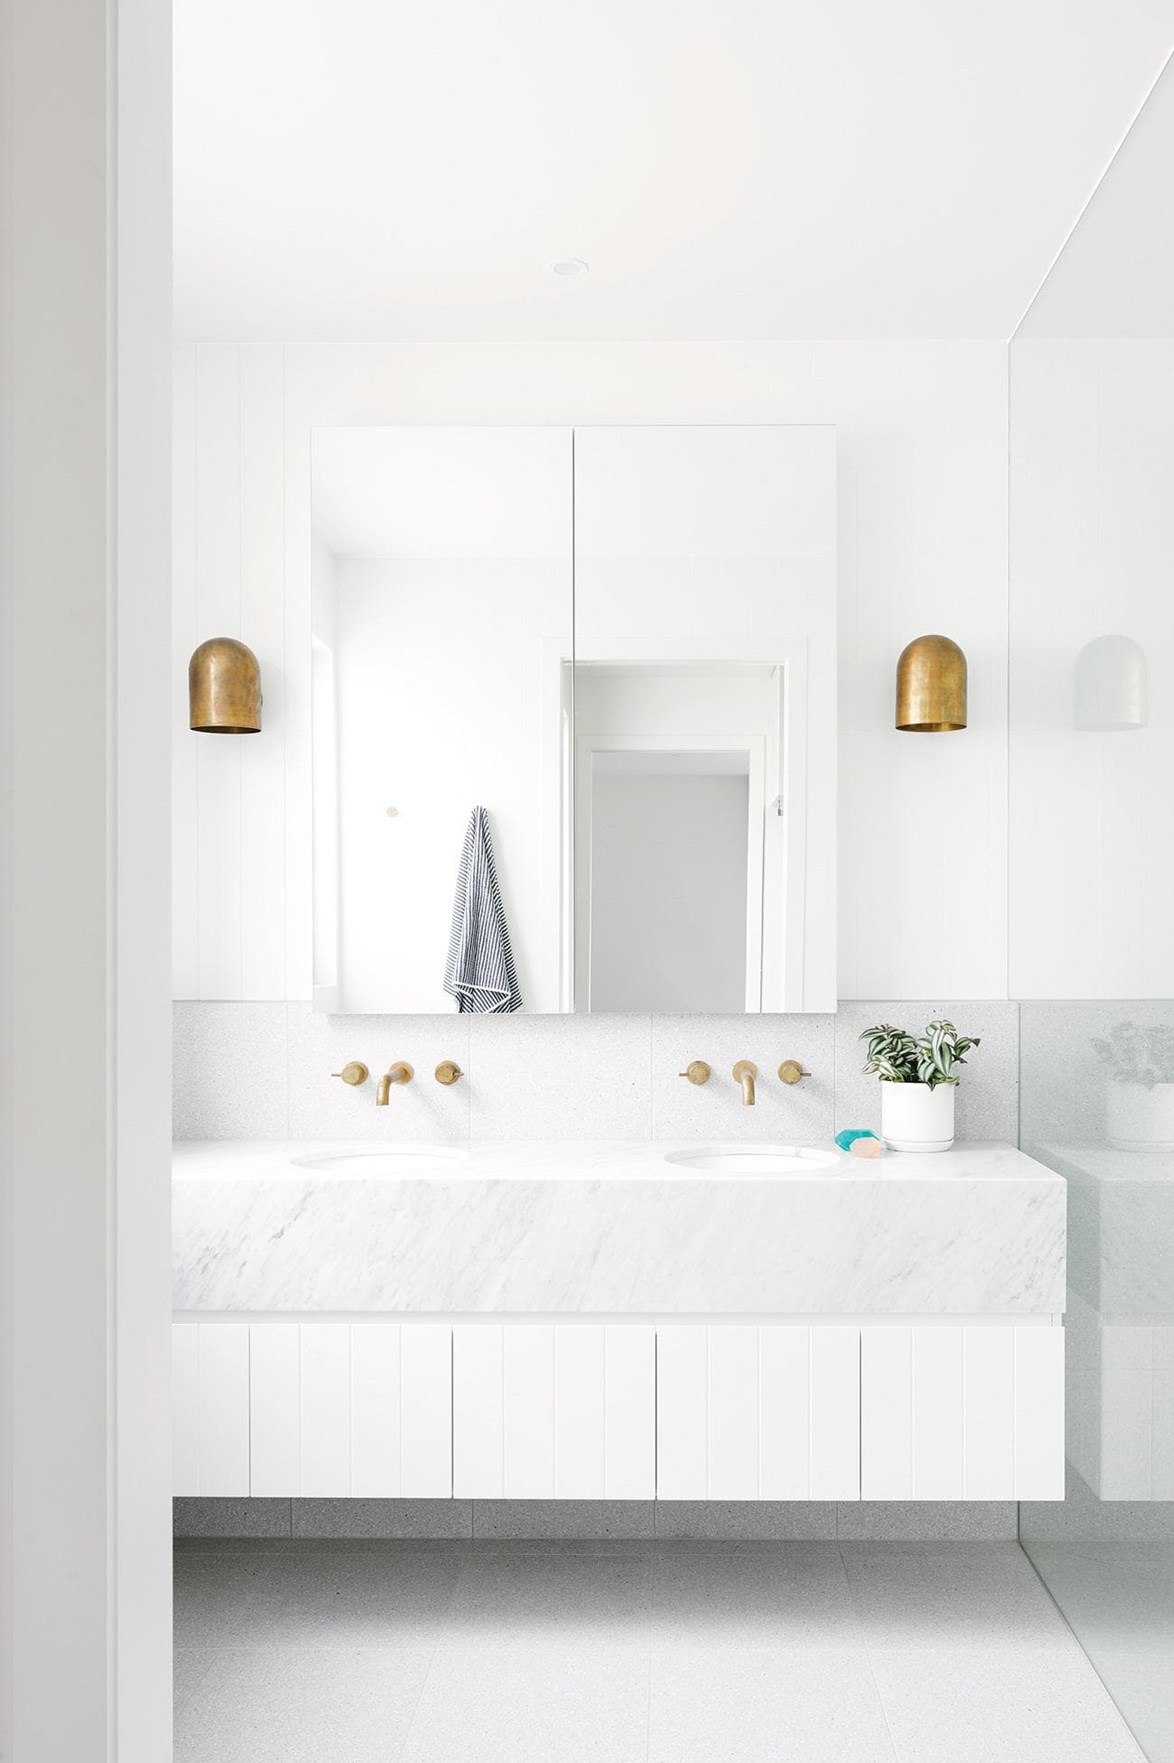 When creating an all-white bathroom it is crucial to think about texture. This bathroom in a [contemporary Geelong home](https://www.homestolove.com.au/this-contemporary-geelong-home-was-built-in-just-five-months-17561|target="_blank"), features a Carrara marble vanity and terrazzo flooring which stops the room feeling washed out.